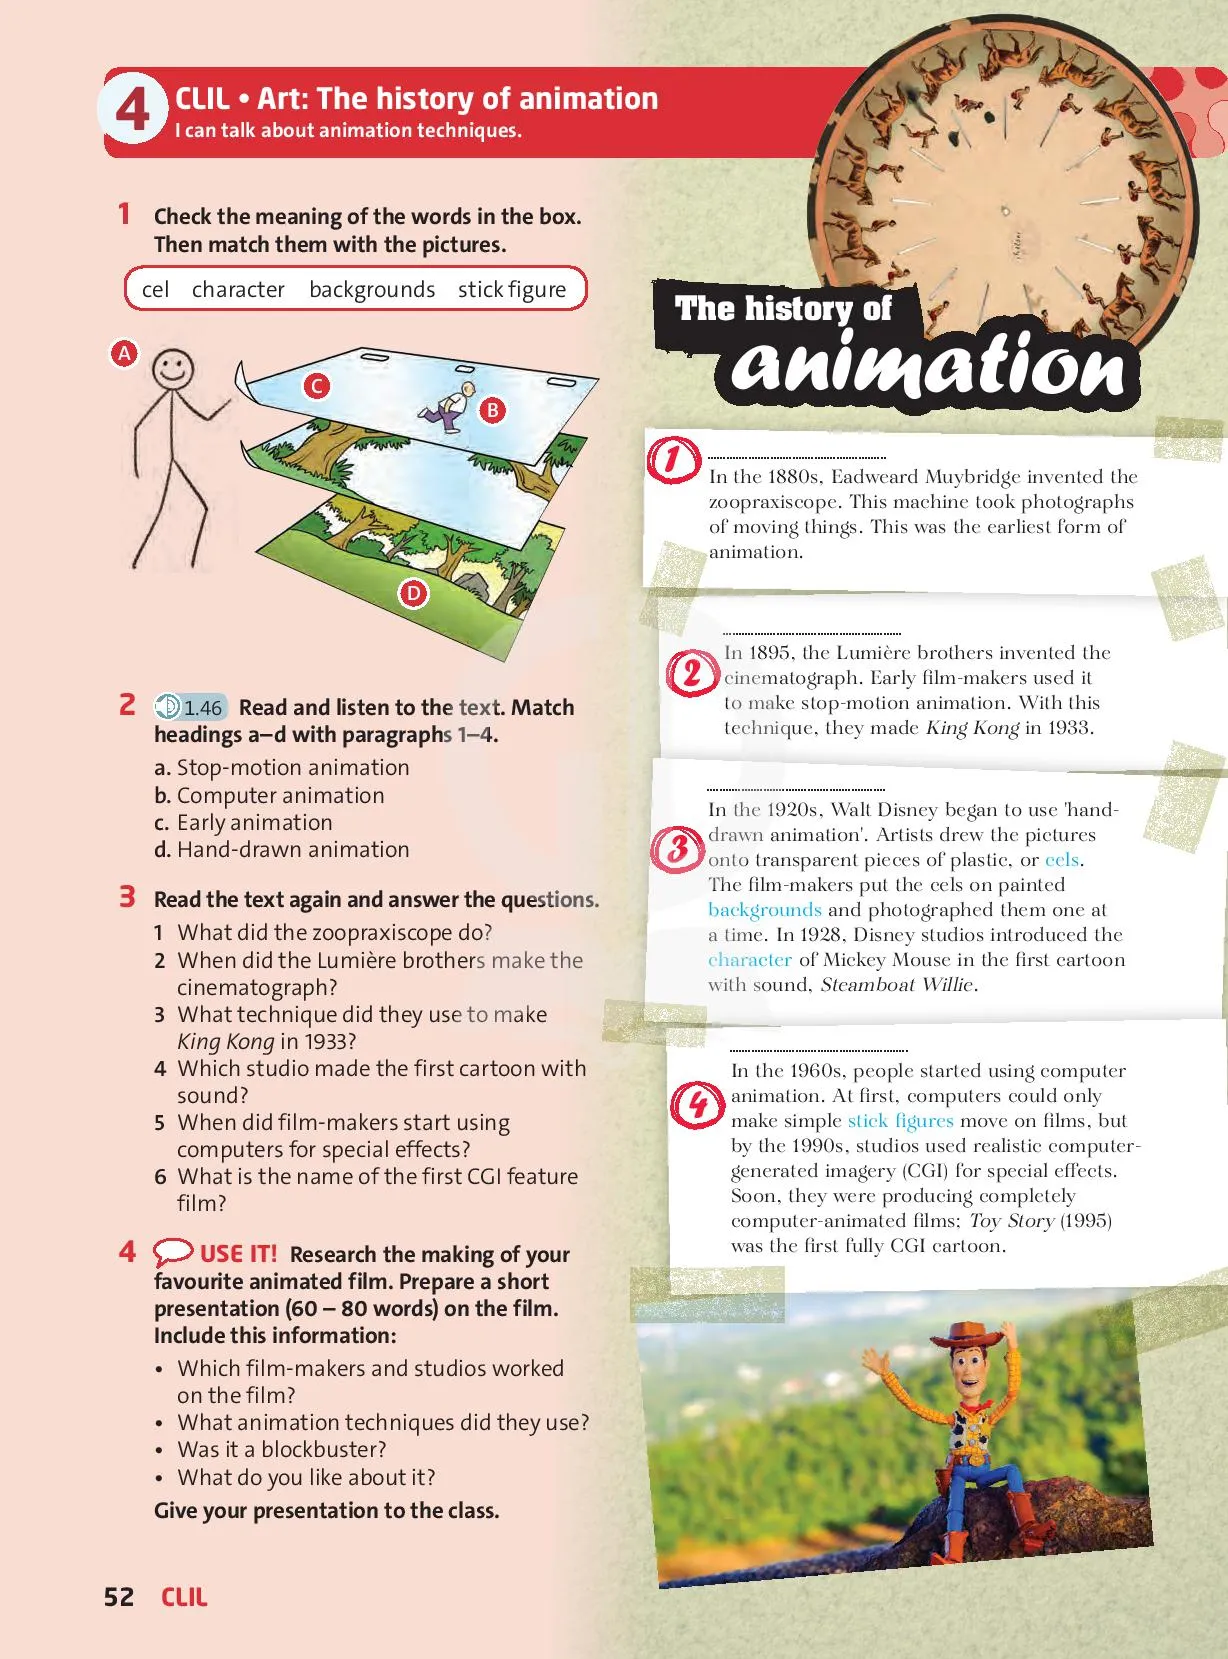 CLIL: The history of animation 